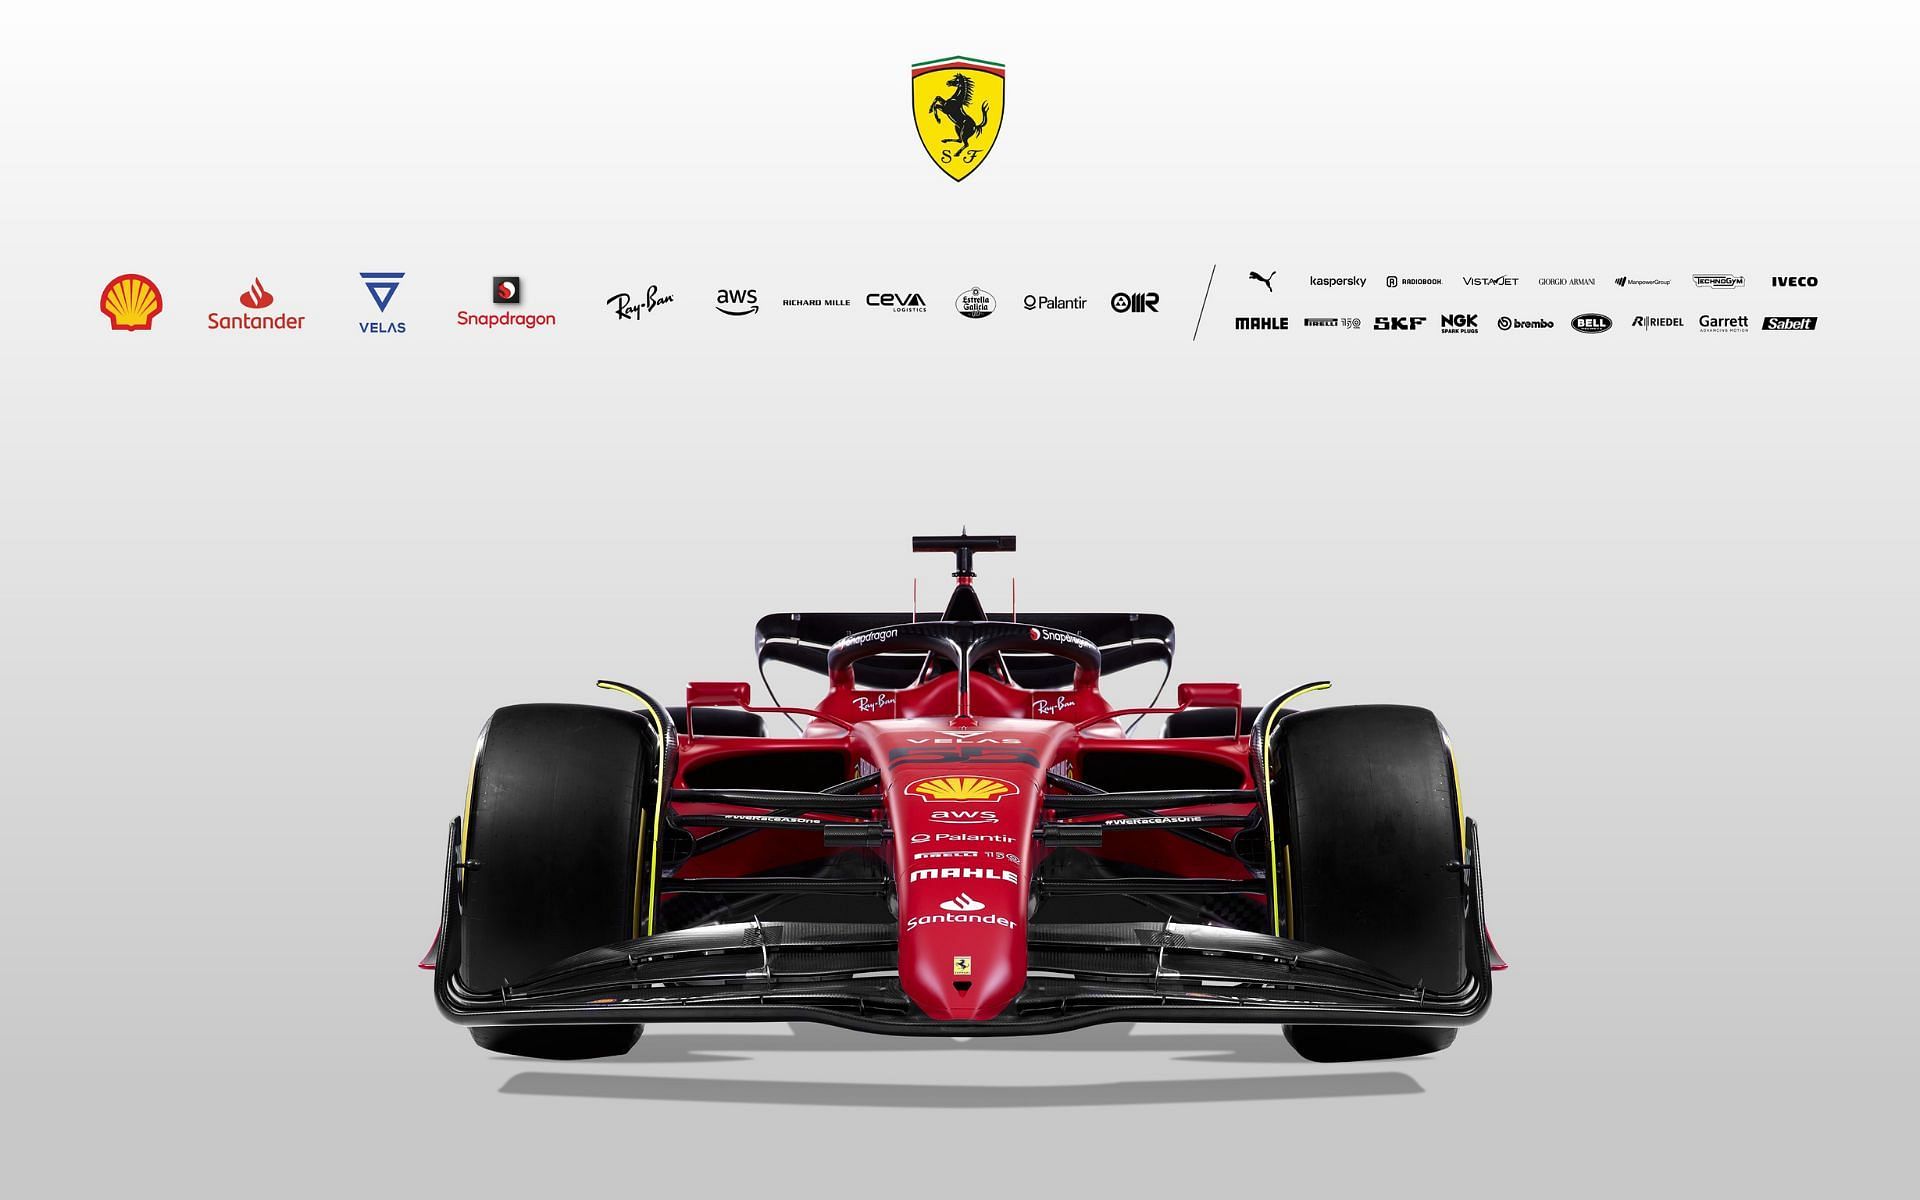 The brand new Ferrari F1-75 was unveiled earlier today